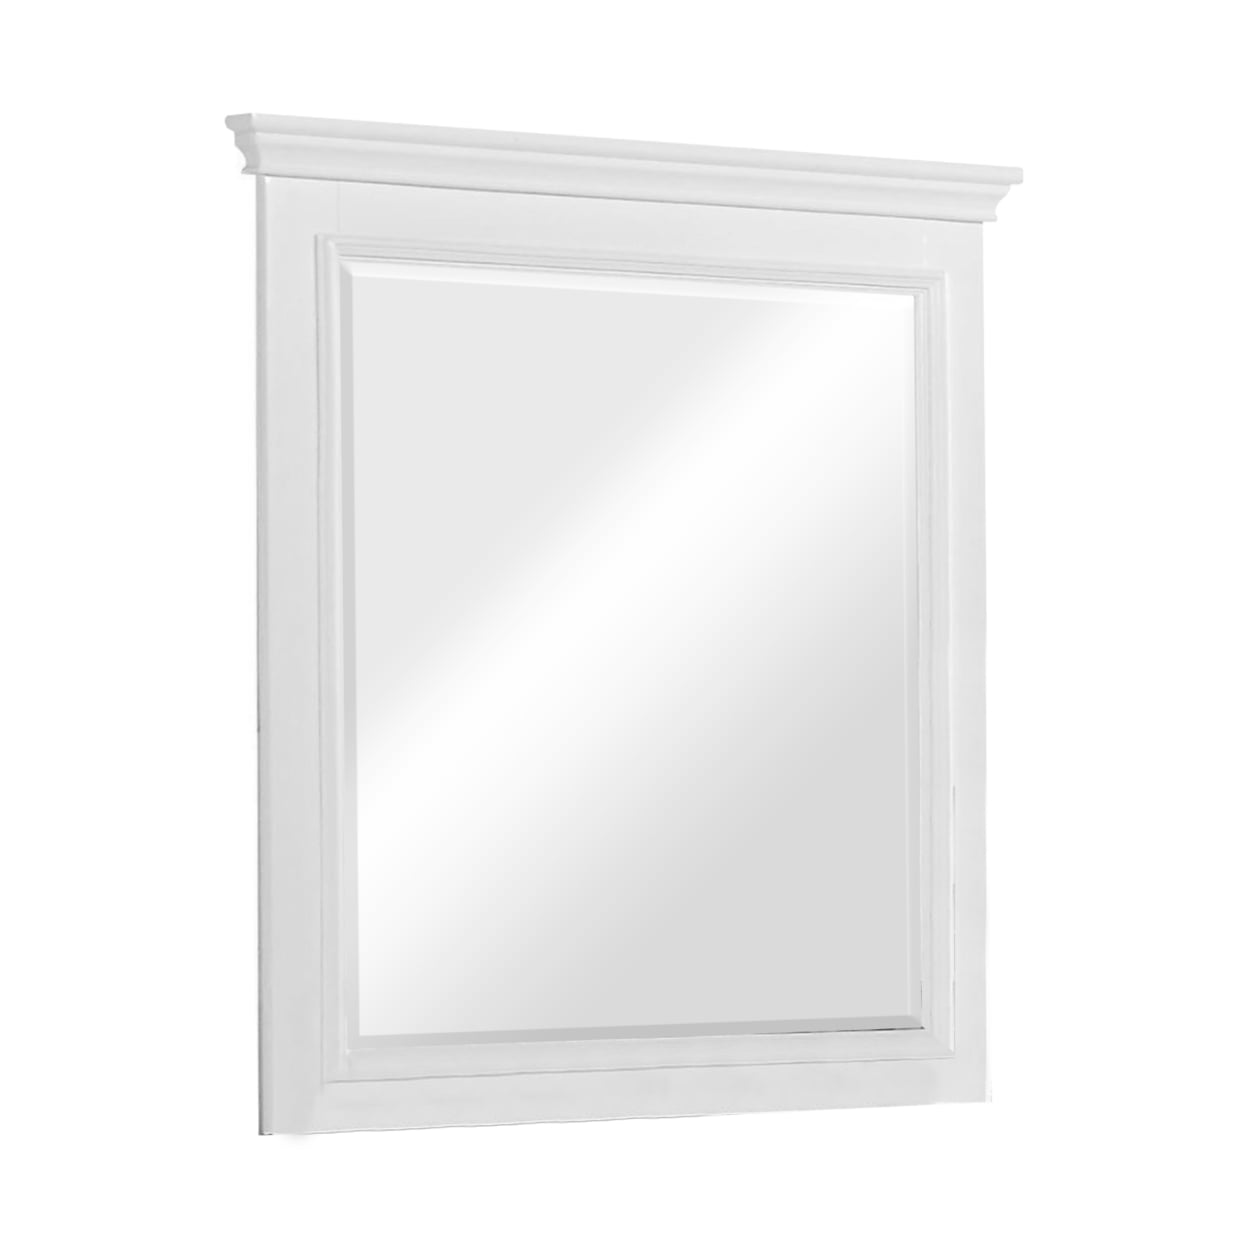 Picture of ACME Furniture 30600 Lacey Rectangle Mirror, White